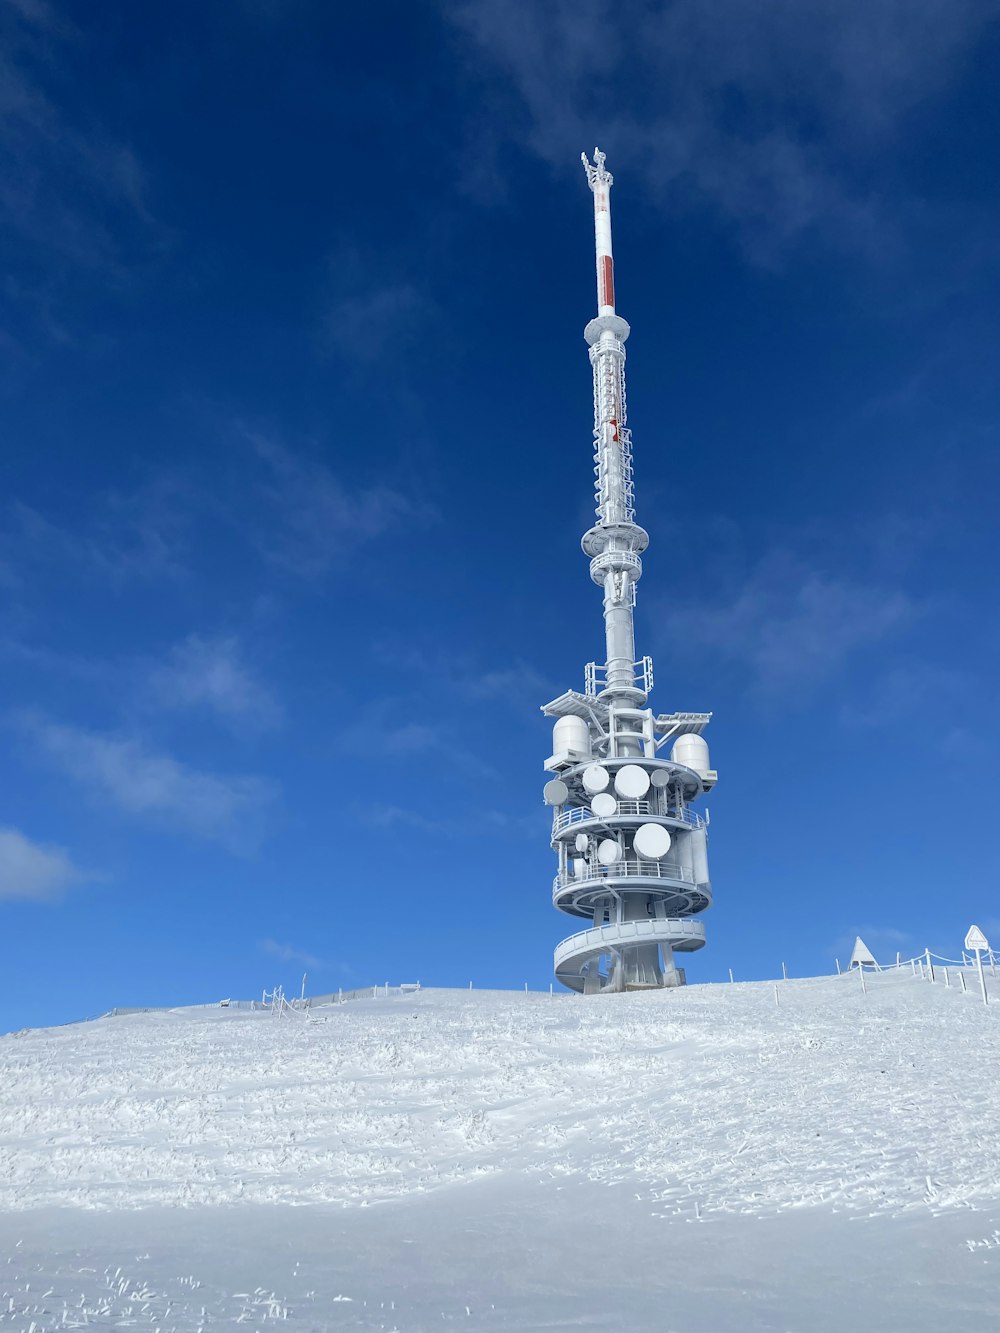 a cell phone tower in the middle of a snowy field